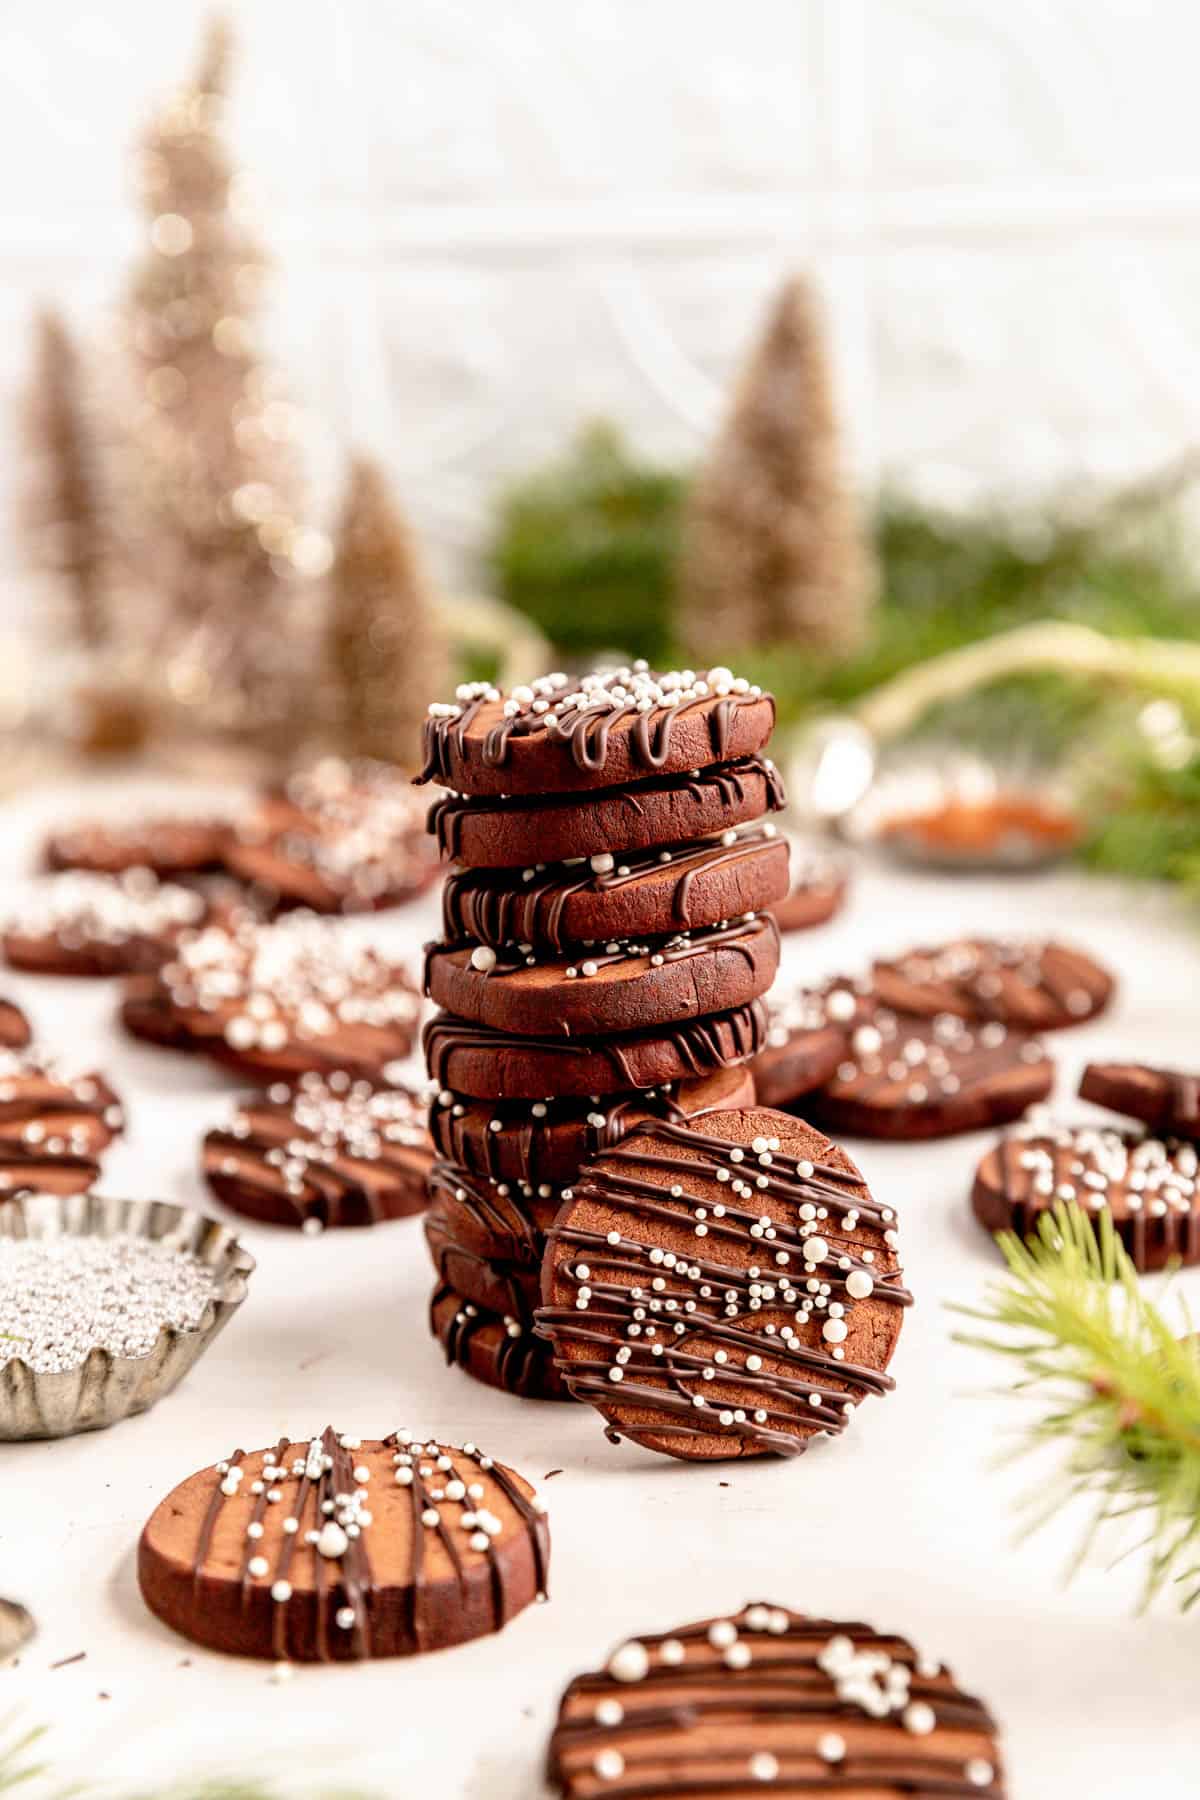 a stack of decorated chocolate butter cookies with on leaning upright on the stack with evergreen branches.